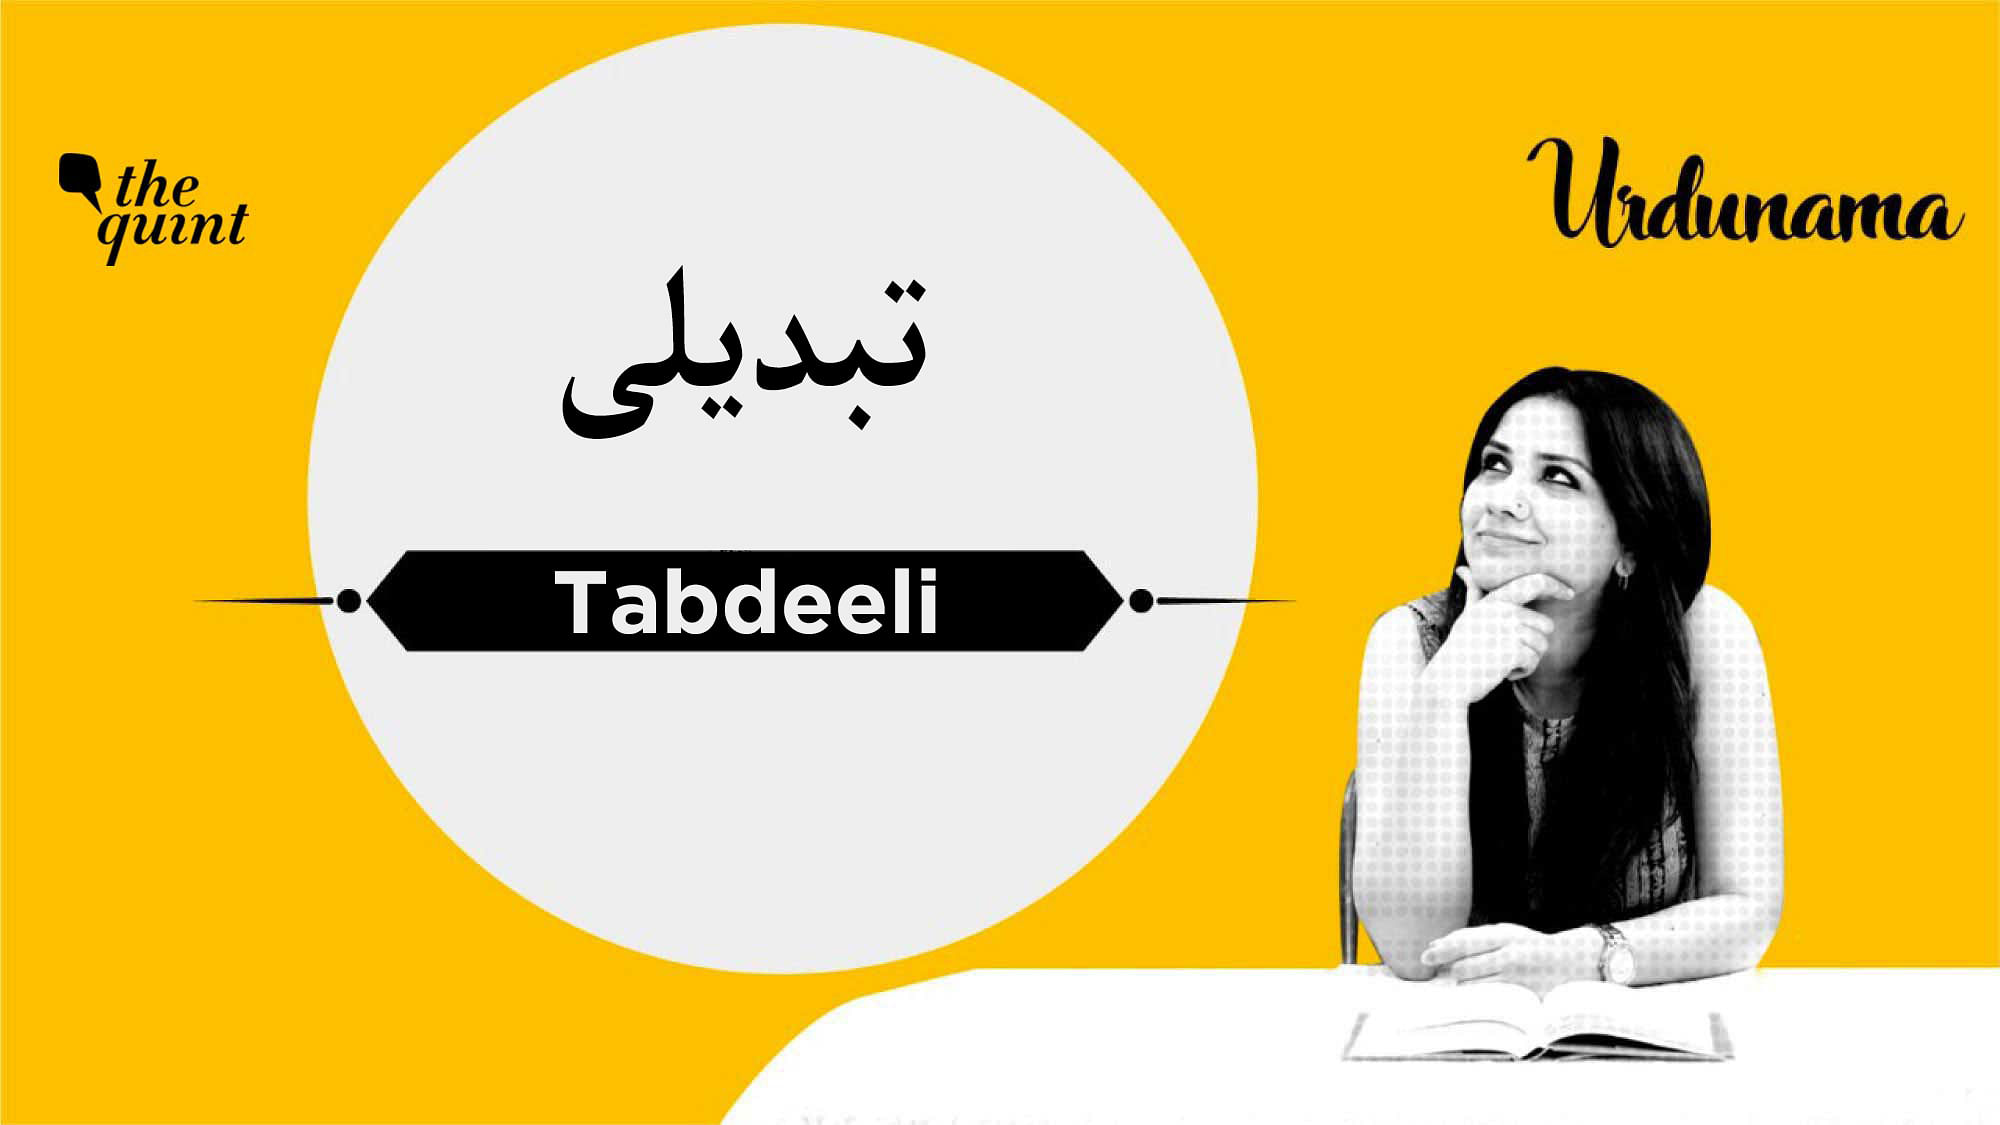 Tune in to know how some of the Urdu poets are hoping for a ‘Tabdeeli’ in the society and people around them.